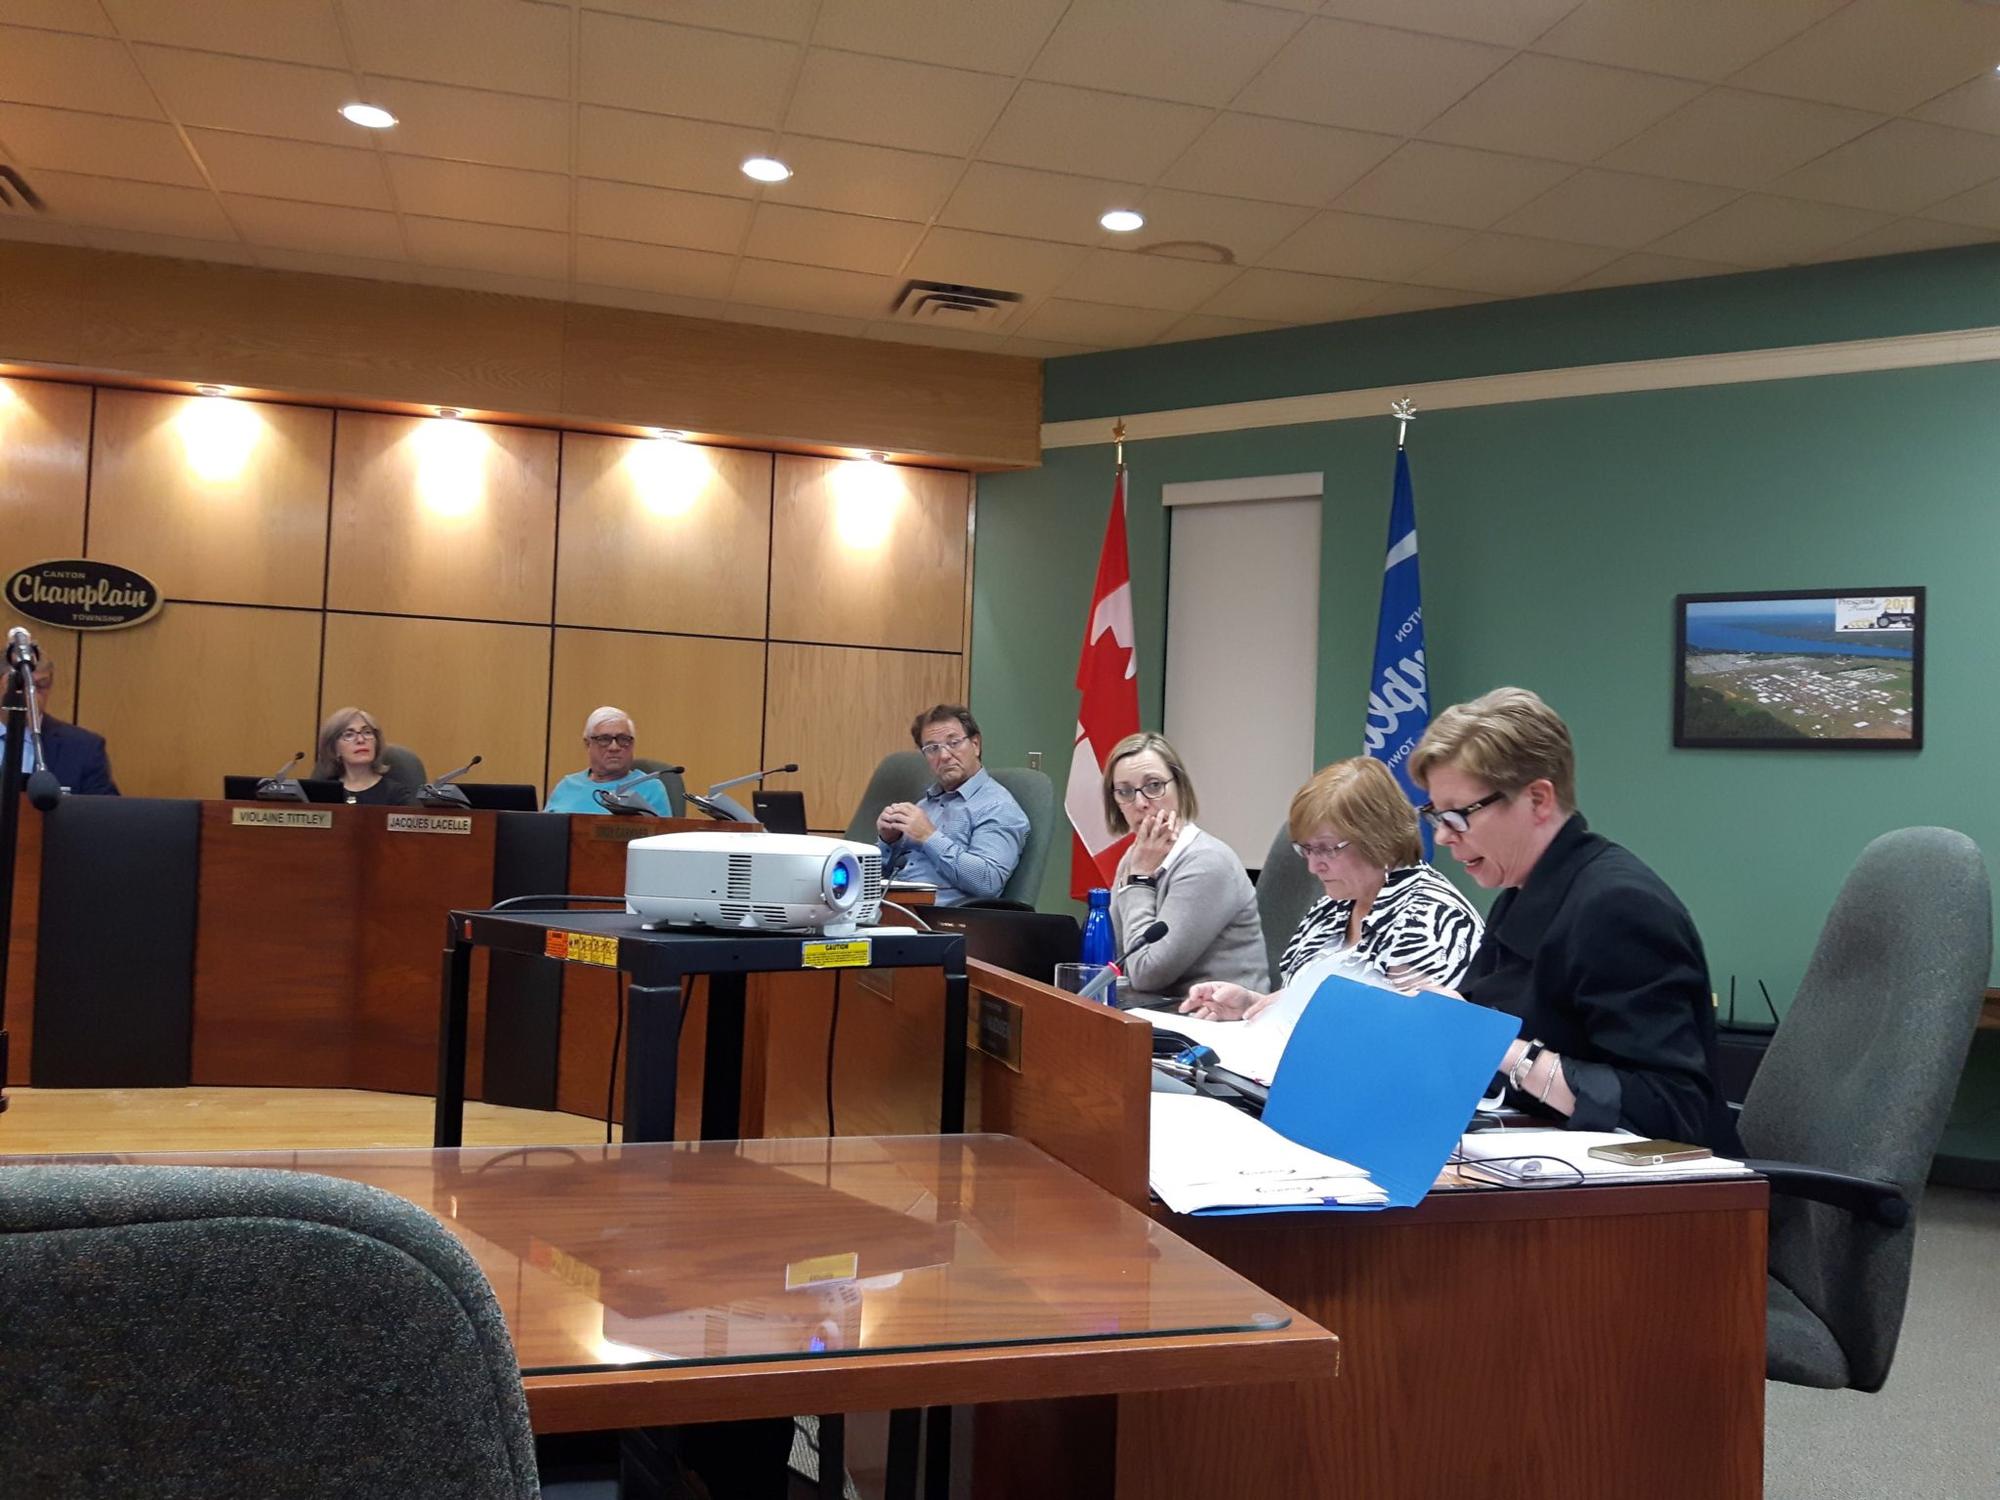 New councillors have questions, ask for reasons behind motions